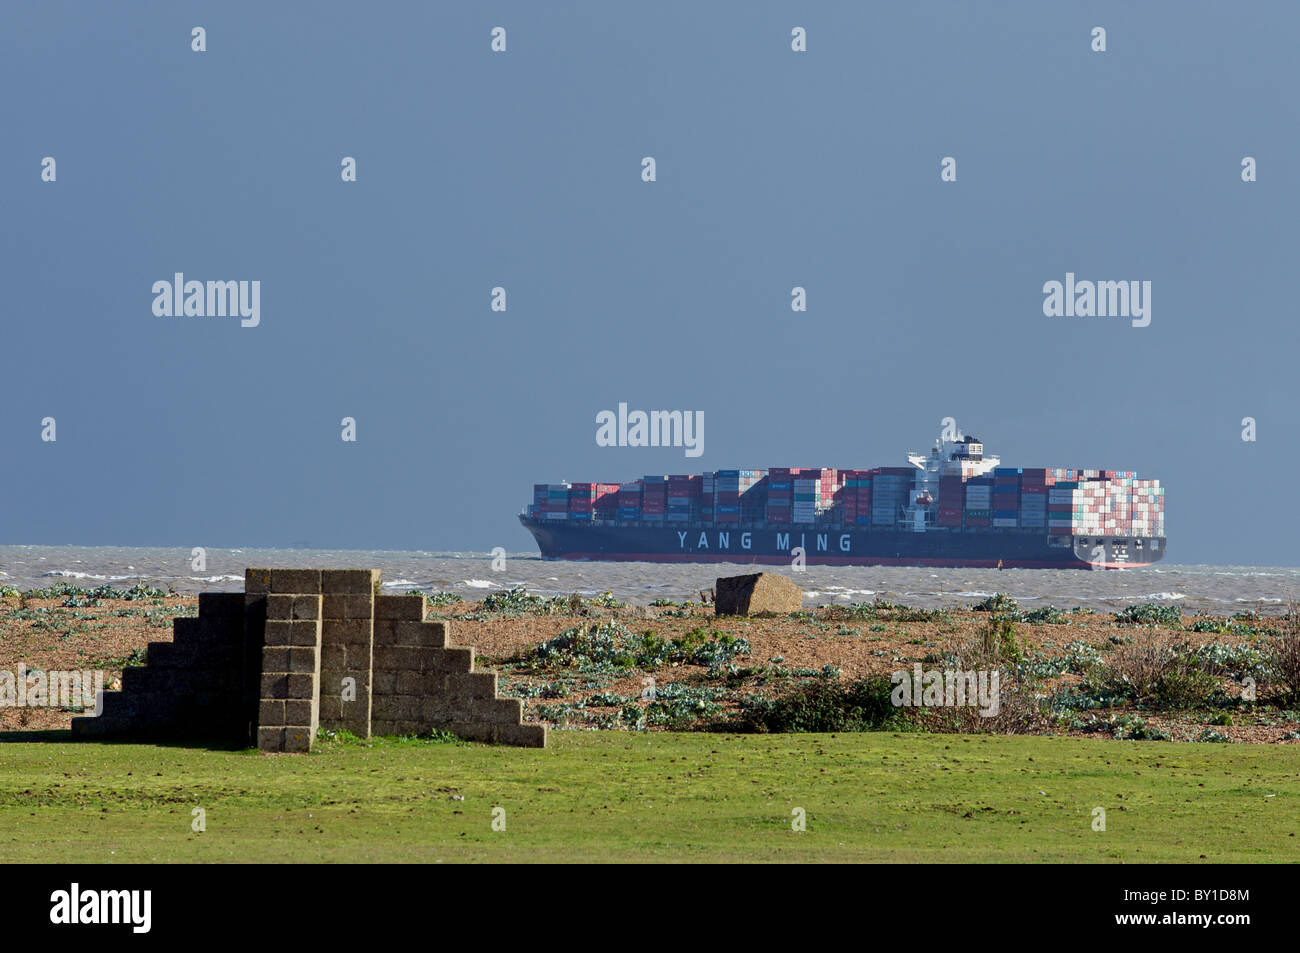 Yang Ming container ship Banque D'Images